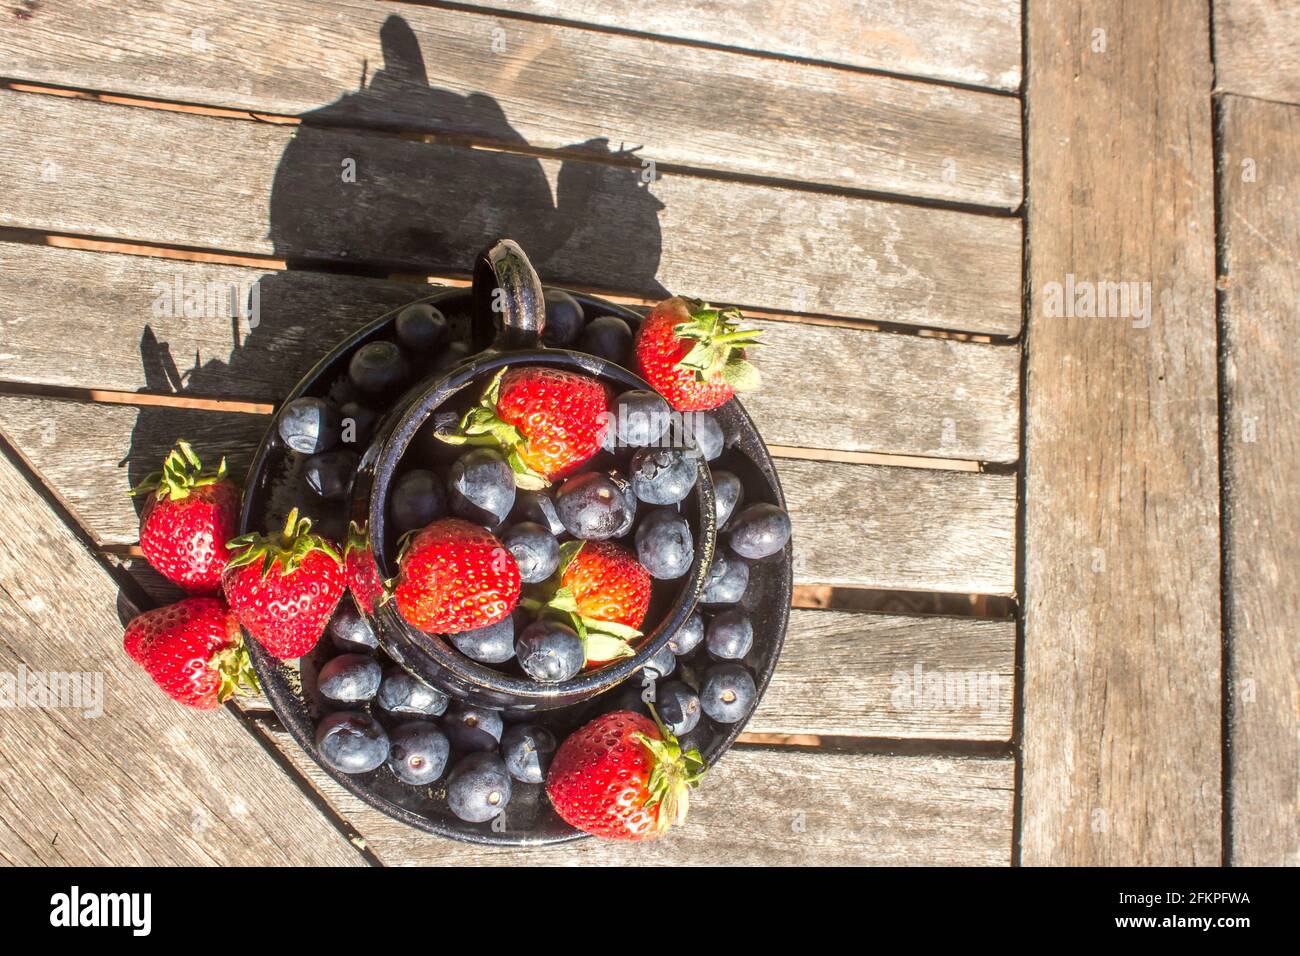 A lay-flat composition of a teacup filled to overflowing with strawberries and blueberries on a weathered, wooden surface Stock Photo